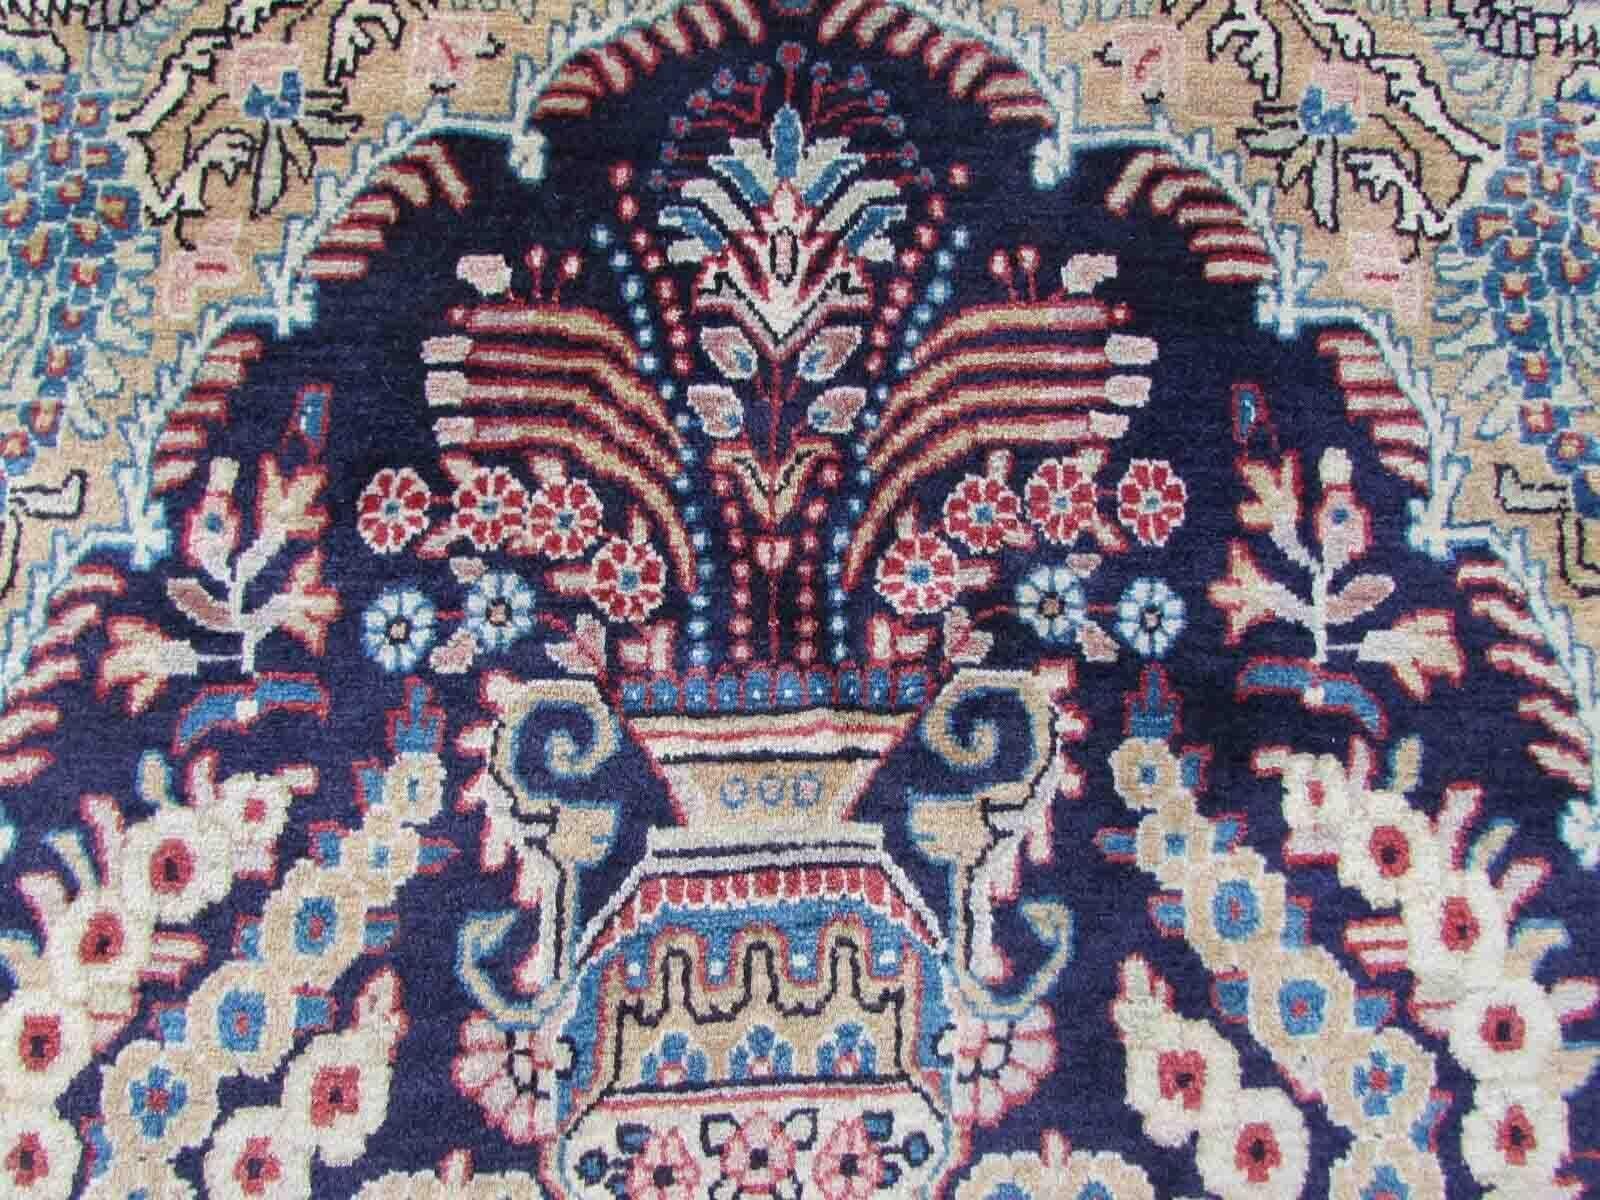 Handmade vintage Kashan rug in prayer design with birds and flowers. The rug is from the end of 20th century in original good condition.

-condition: original good, 

-circa: 1970s,

-size: 4' x 6.8' (124cm x 209cm),

-material: